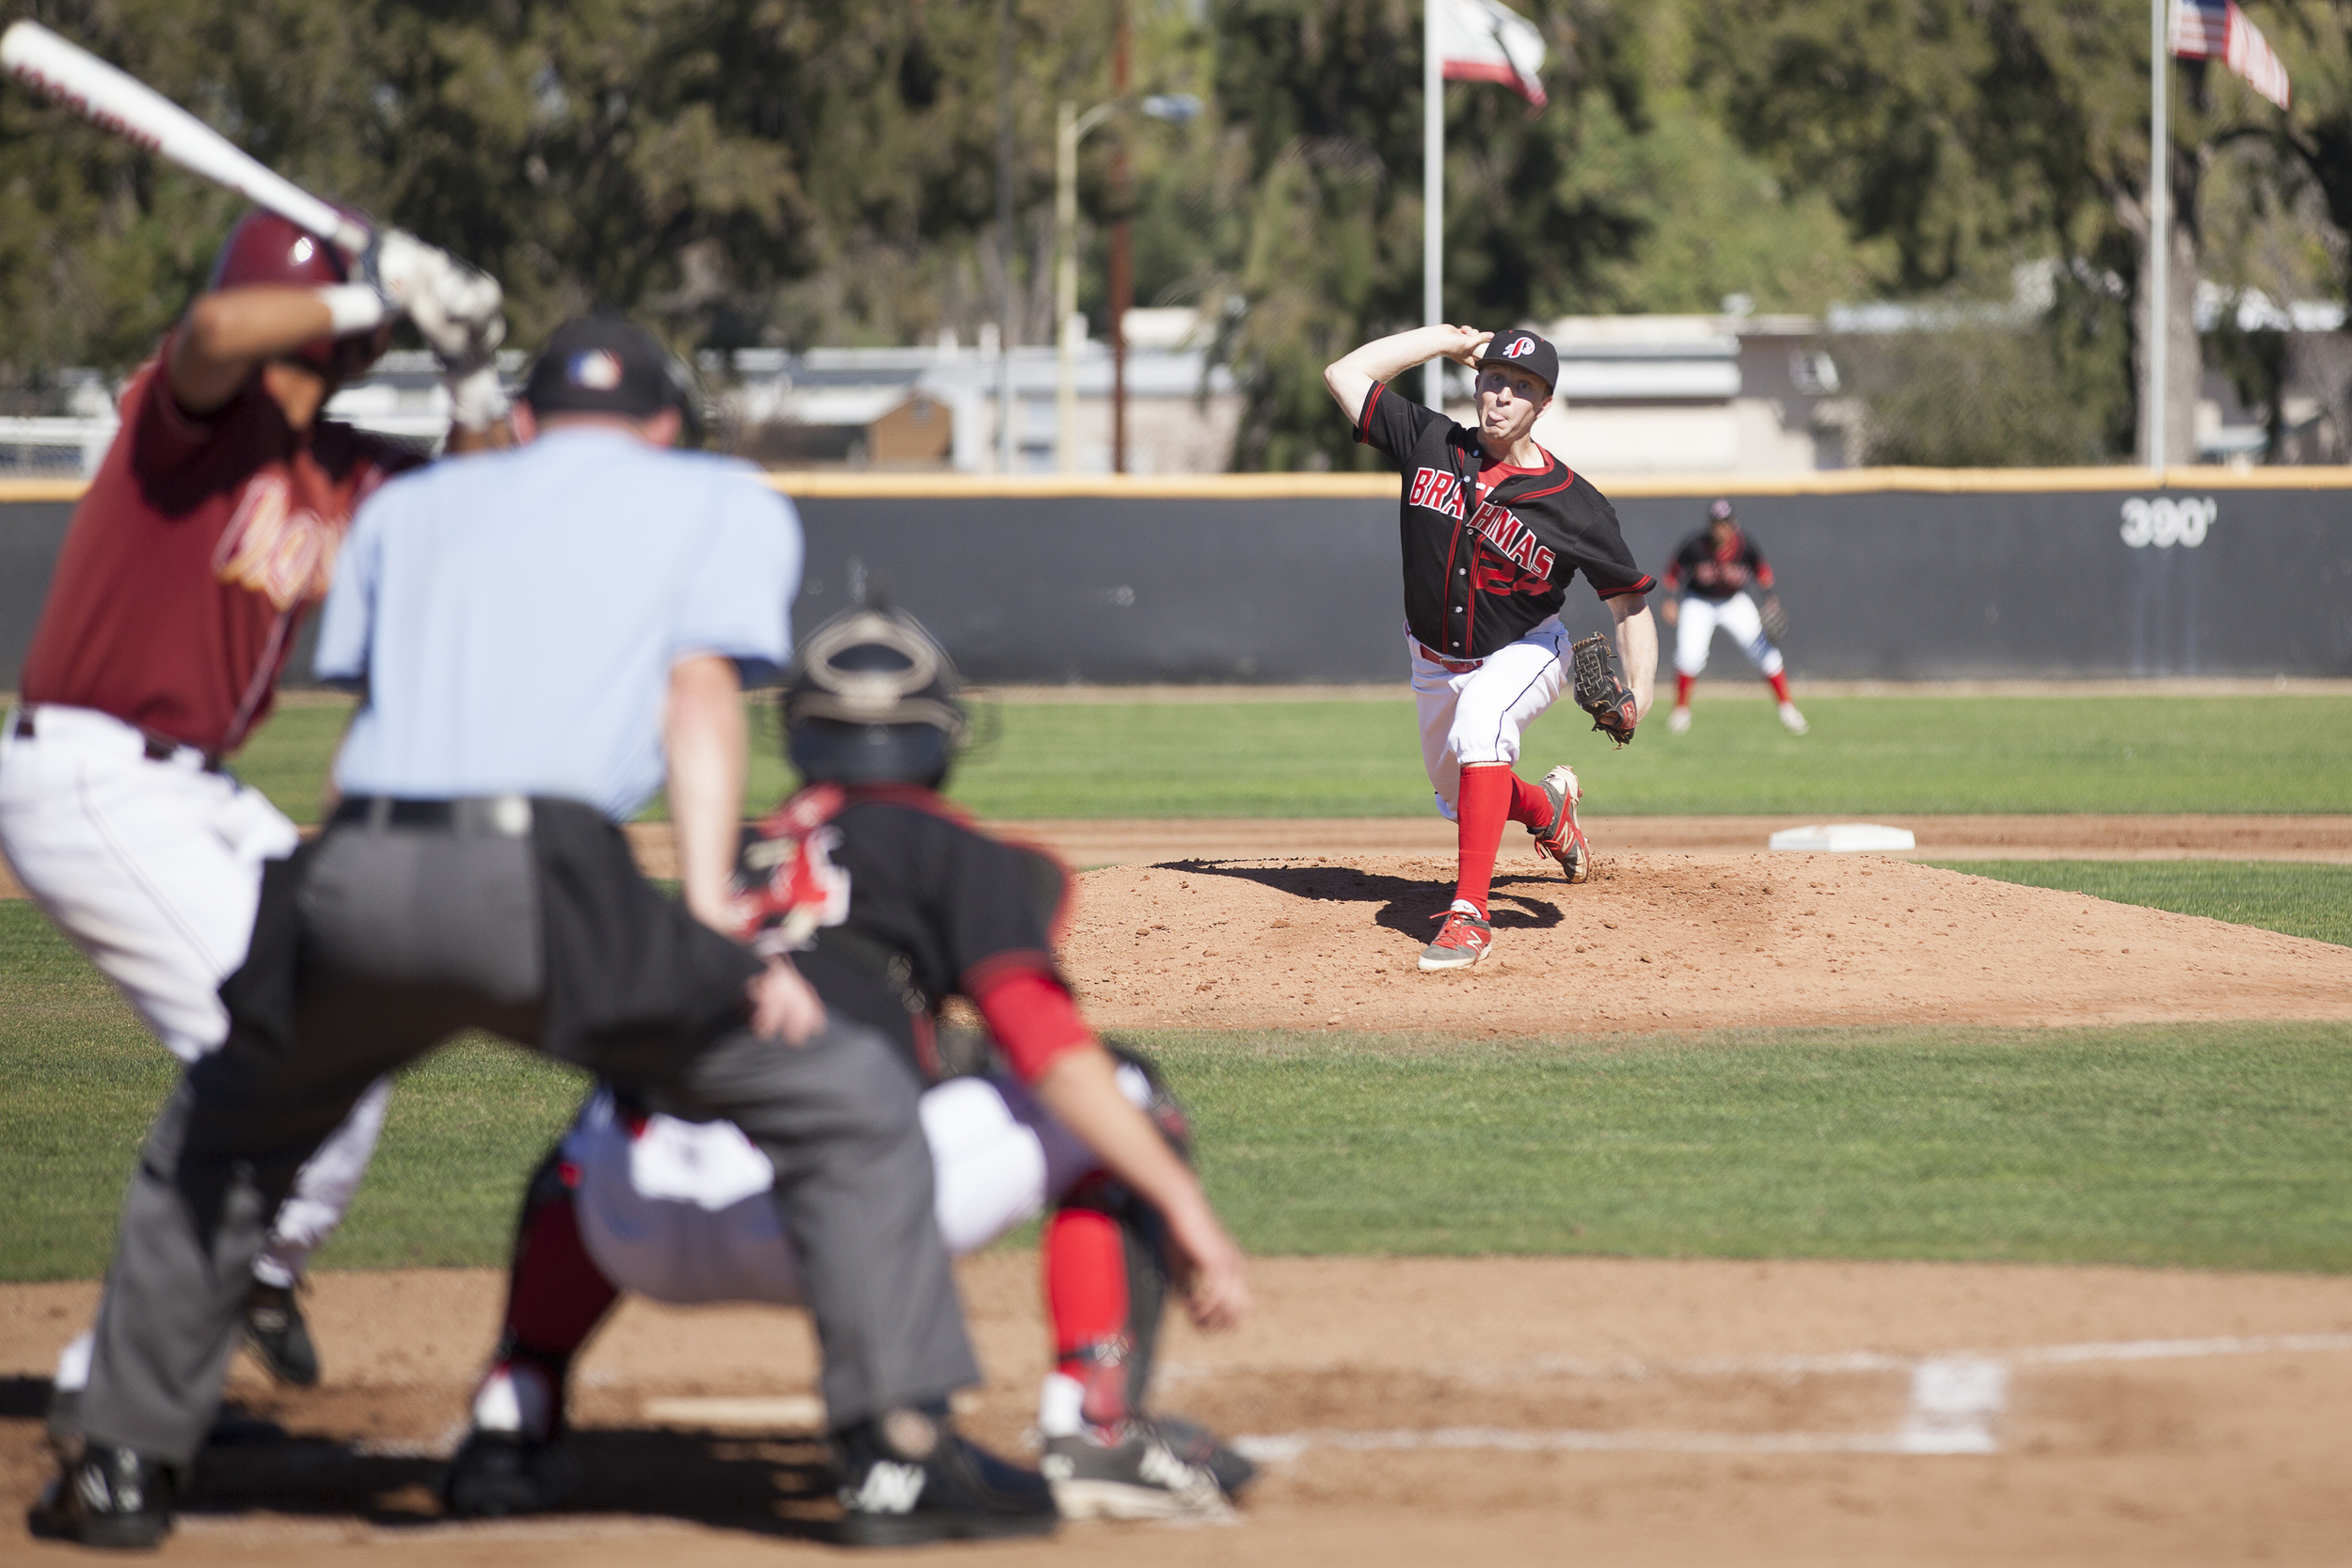  Brett Weisberg throws a pitch against a Glendale Vaquero during a home game in Woodland Hills, Calif. on Saturday, Feb. 13, 2016. Glendale would go on to win the game 15-6. 